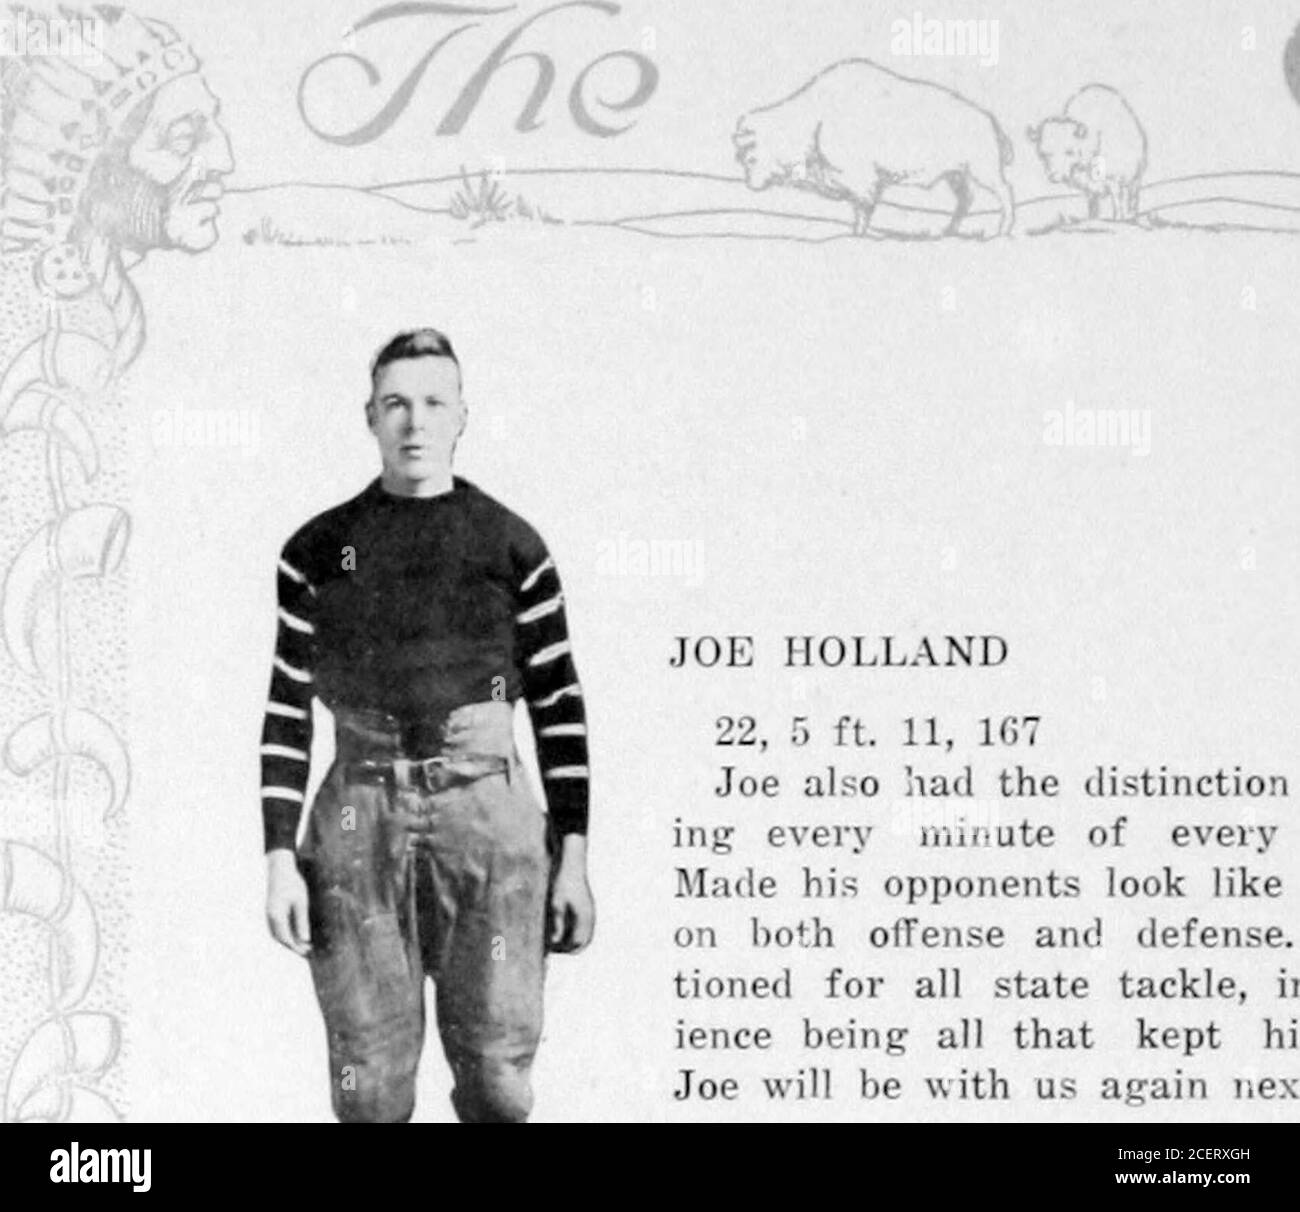 . Oracle, The. I. ORACLE/ V. HOLLAND22, 5 ft. 11, 167 Joe also had the distinction of be-ing every minute of every game. Made his opponents look like oth offense and defense. Men-tioned for all state tackle, inexper-ience being all that kept him ofT.Joe will be with us again next year. Stock Photo